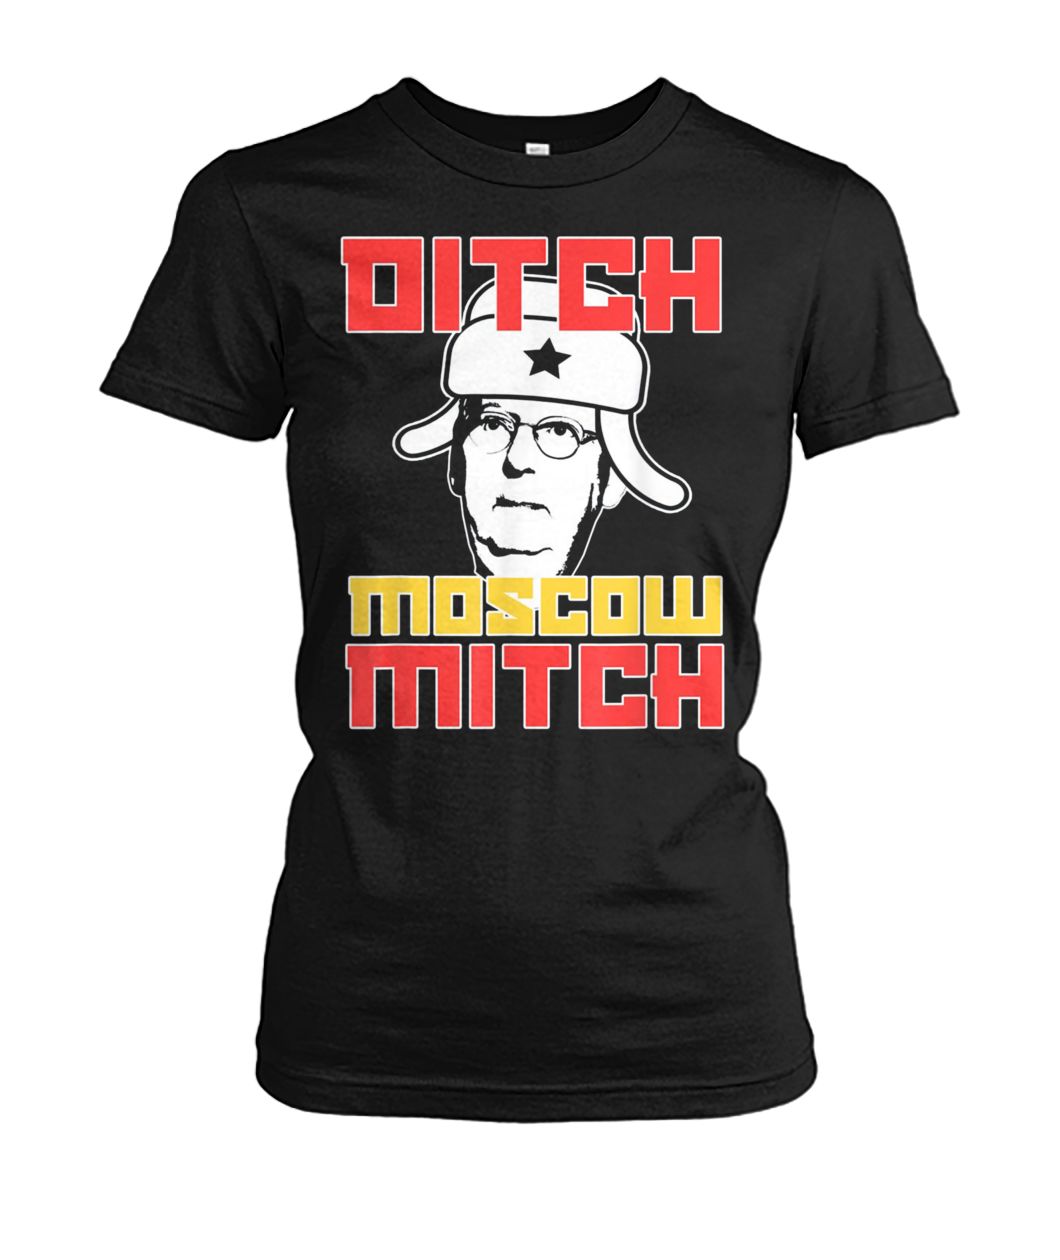 Ditch moscow mitch senator mcconnell anti turtle face meme women's crew tee